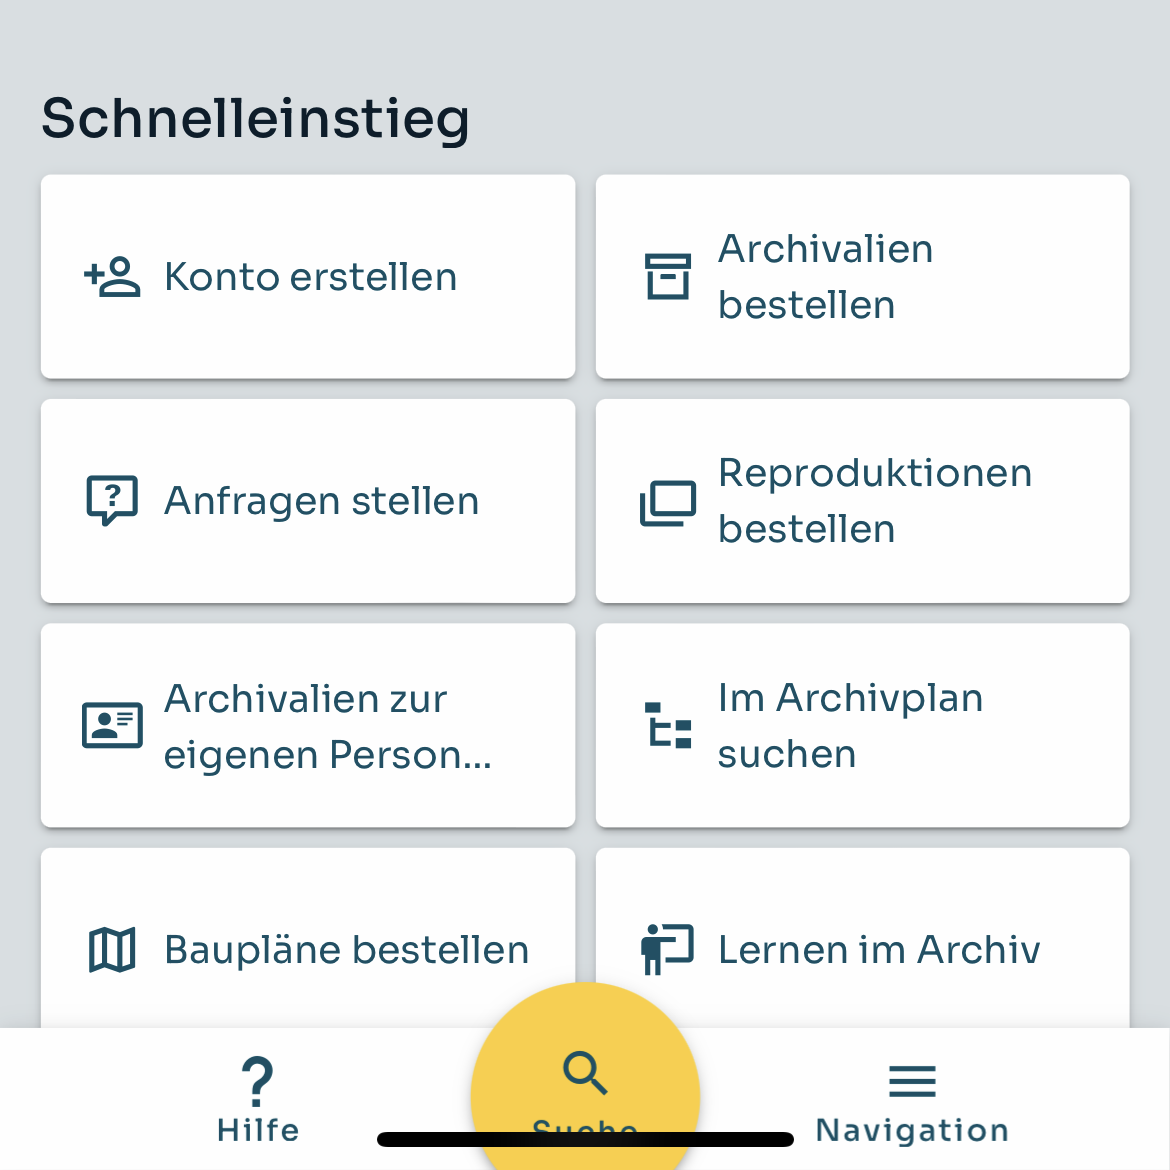 Application resulting from the digital service design strategy of the State Archive Basel-Stadt and State Archive St. Gallen.